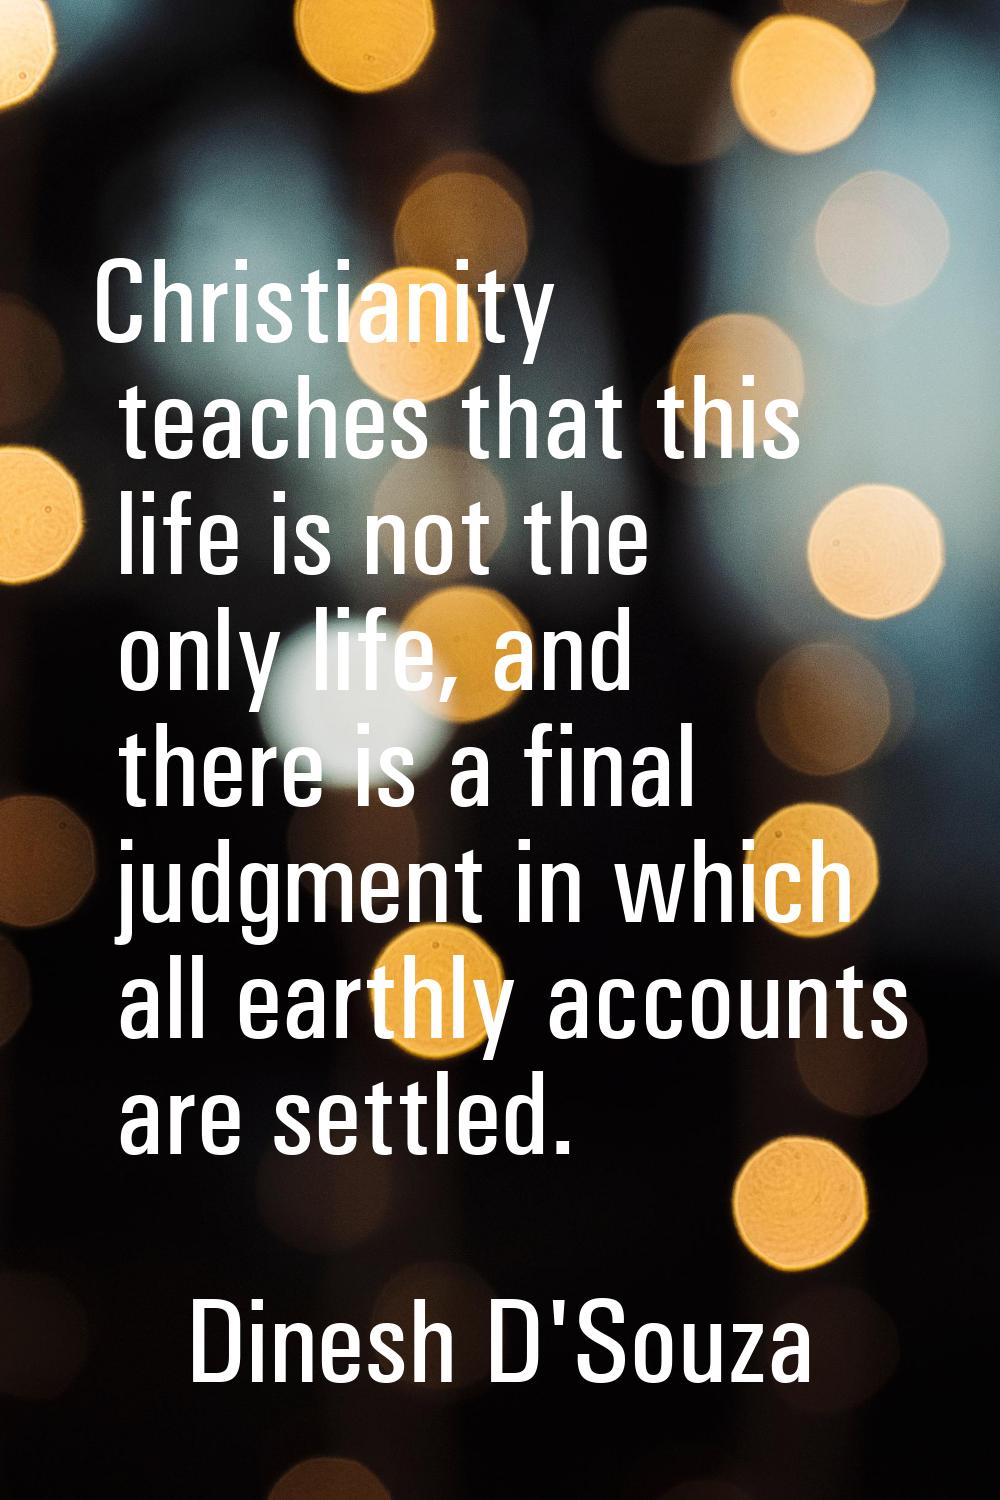 Christianity teaches that this life is not the only life, and there is a final judgment in which al